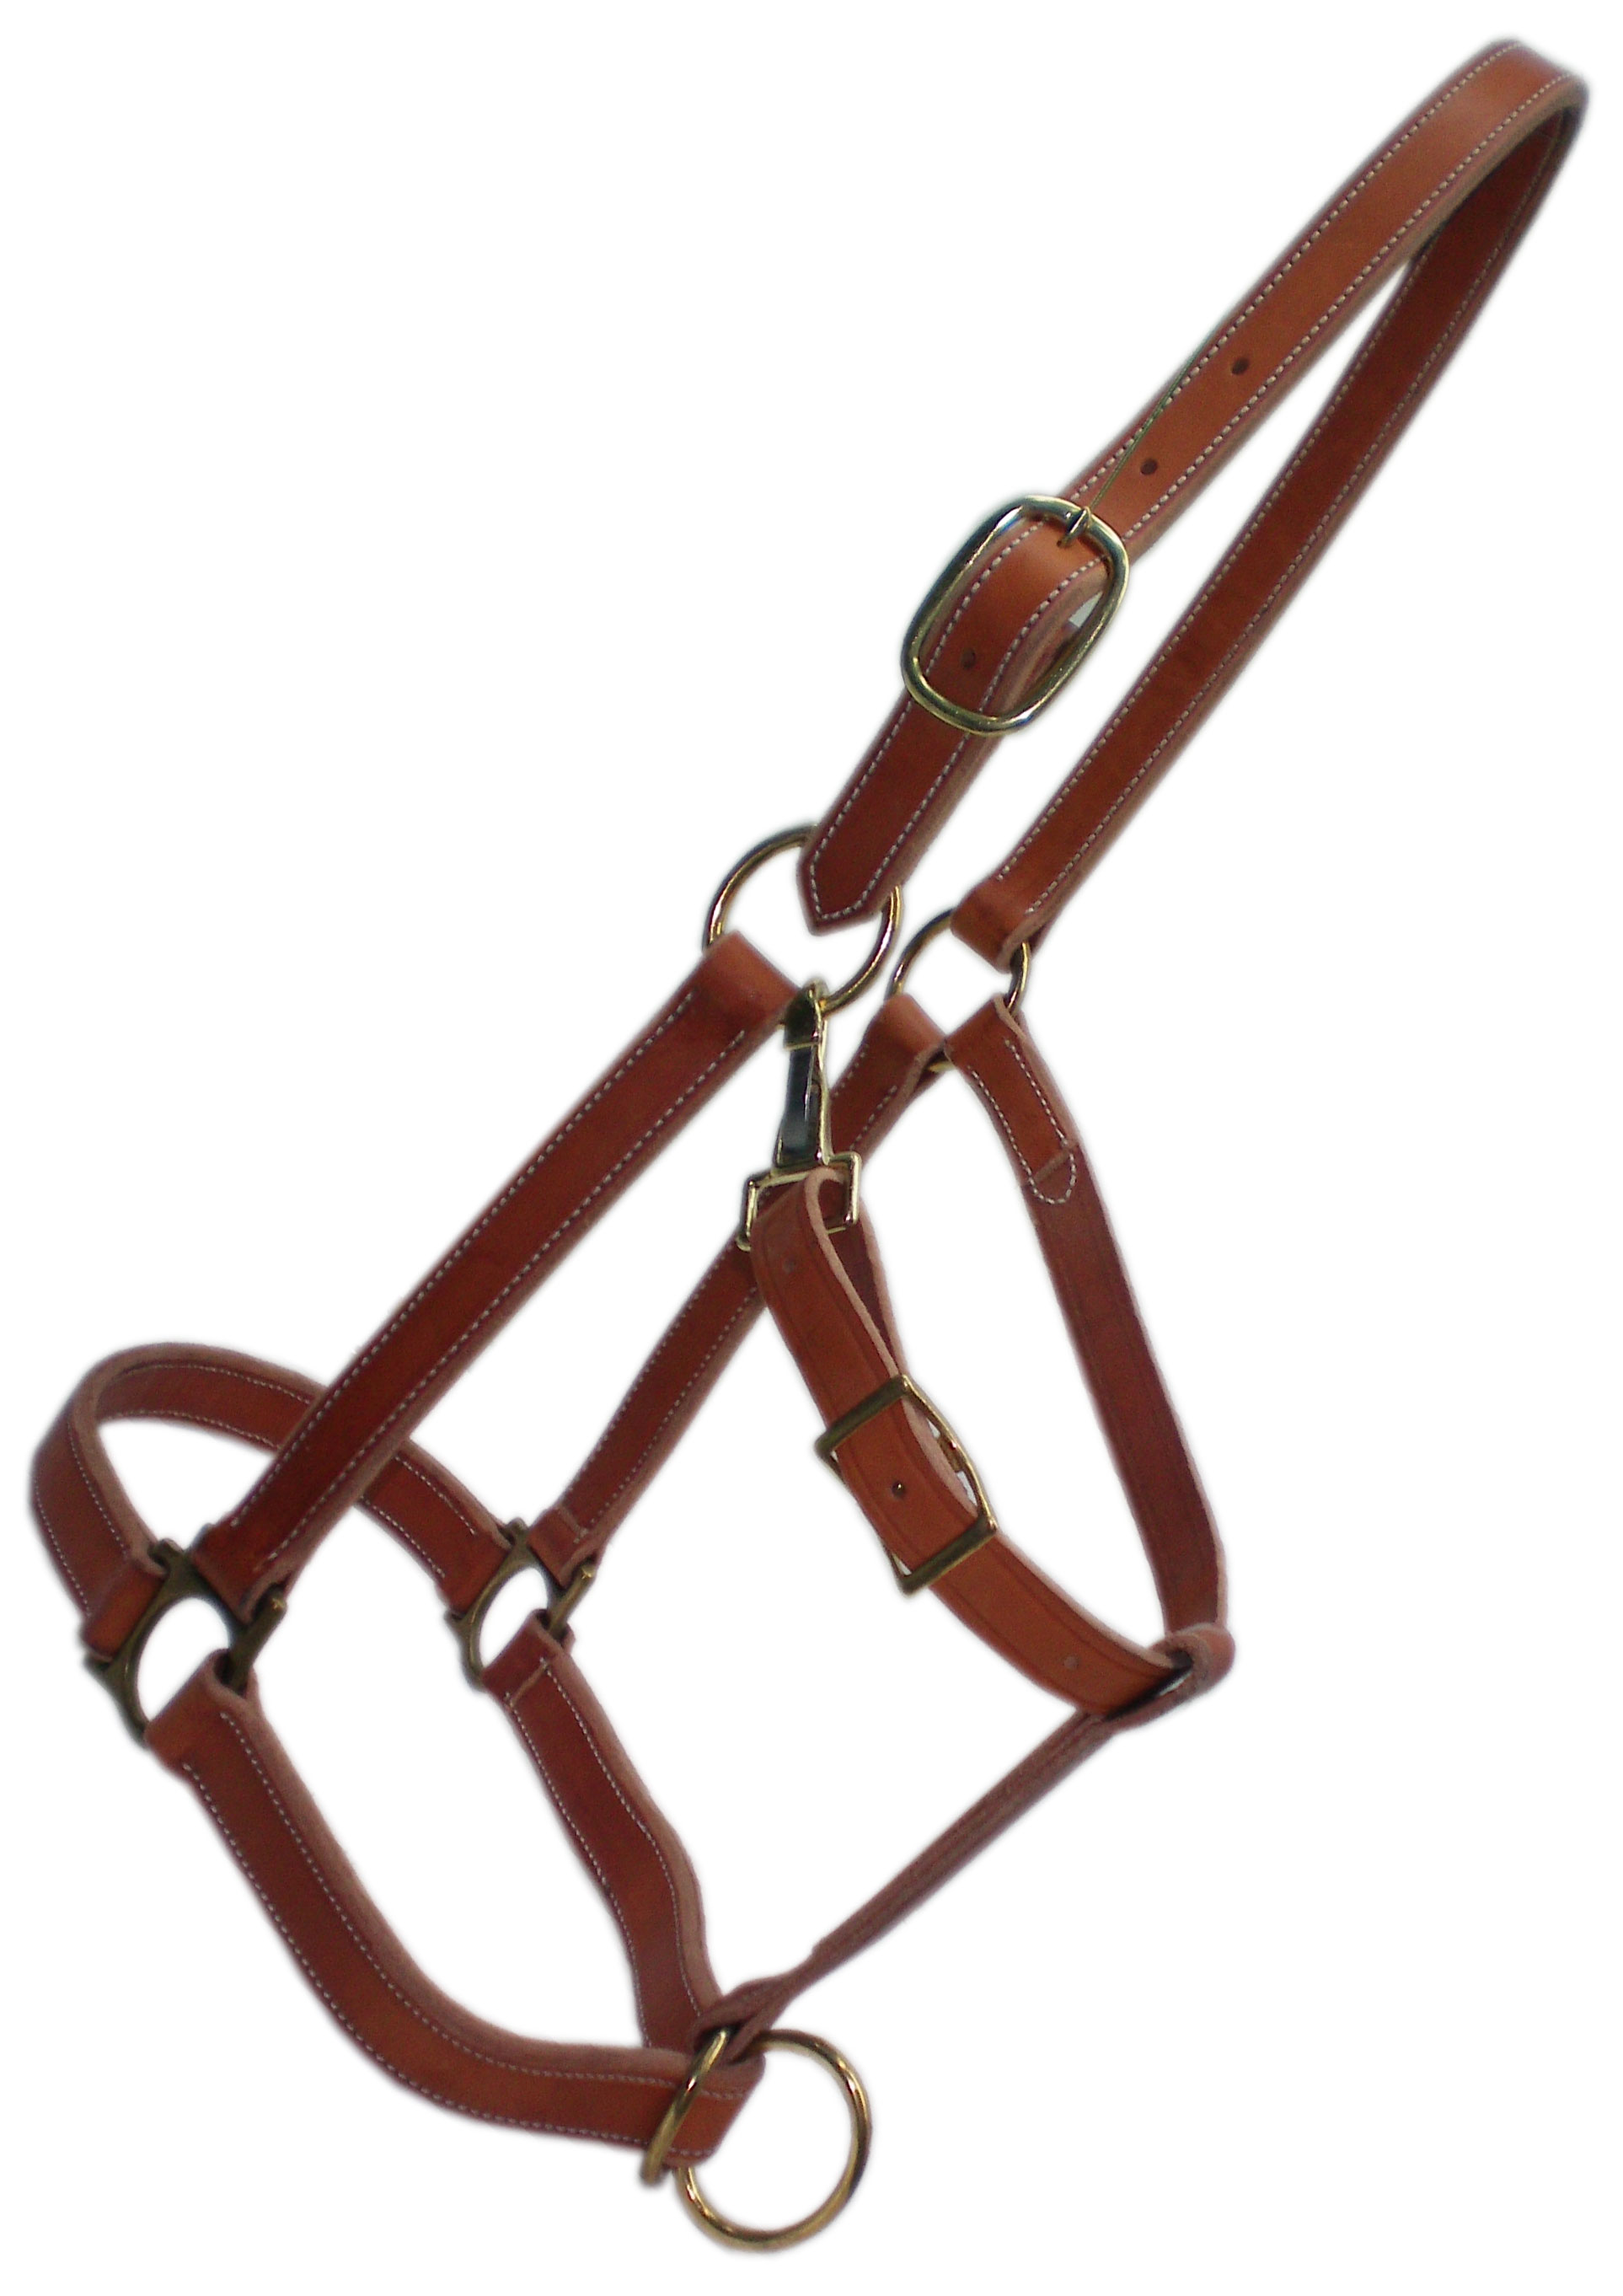 Tough-1 Leather Stable Horse Halter, Brown